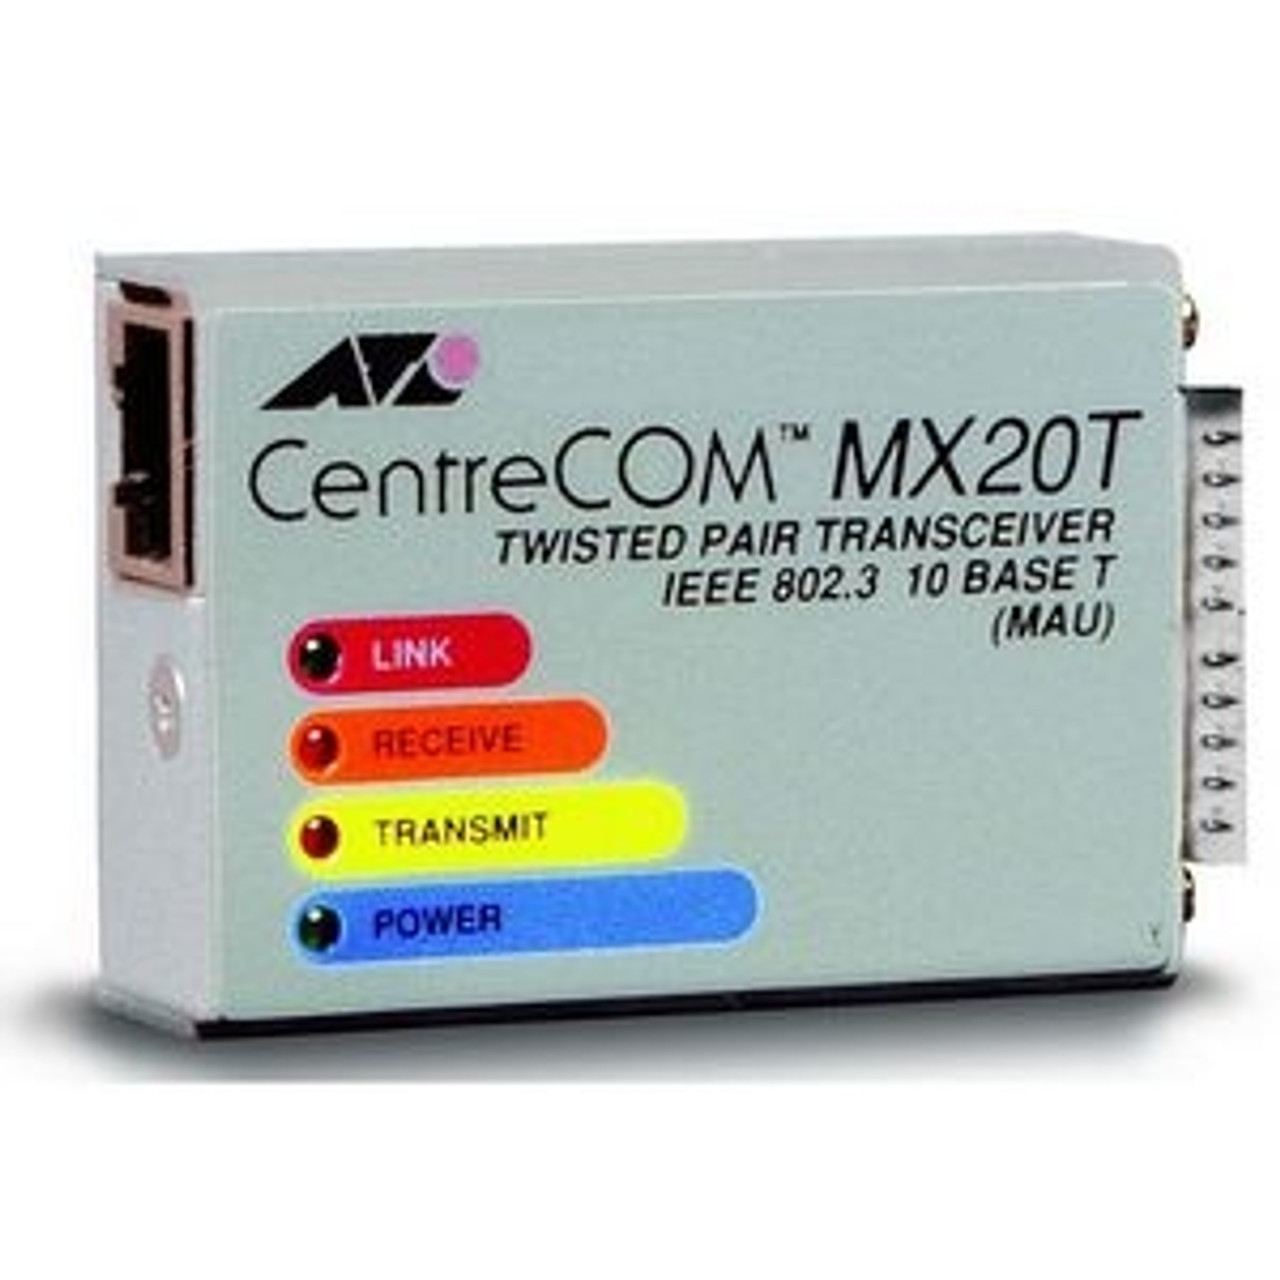 AT-MX20T-04 Allied Telesis 10Mbps Ethernet MAU Twisted Pair Micro Transceiver Module